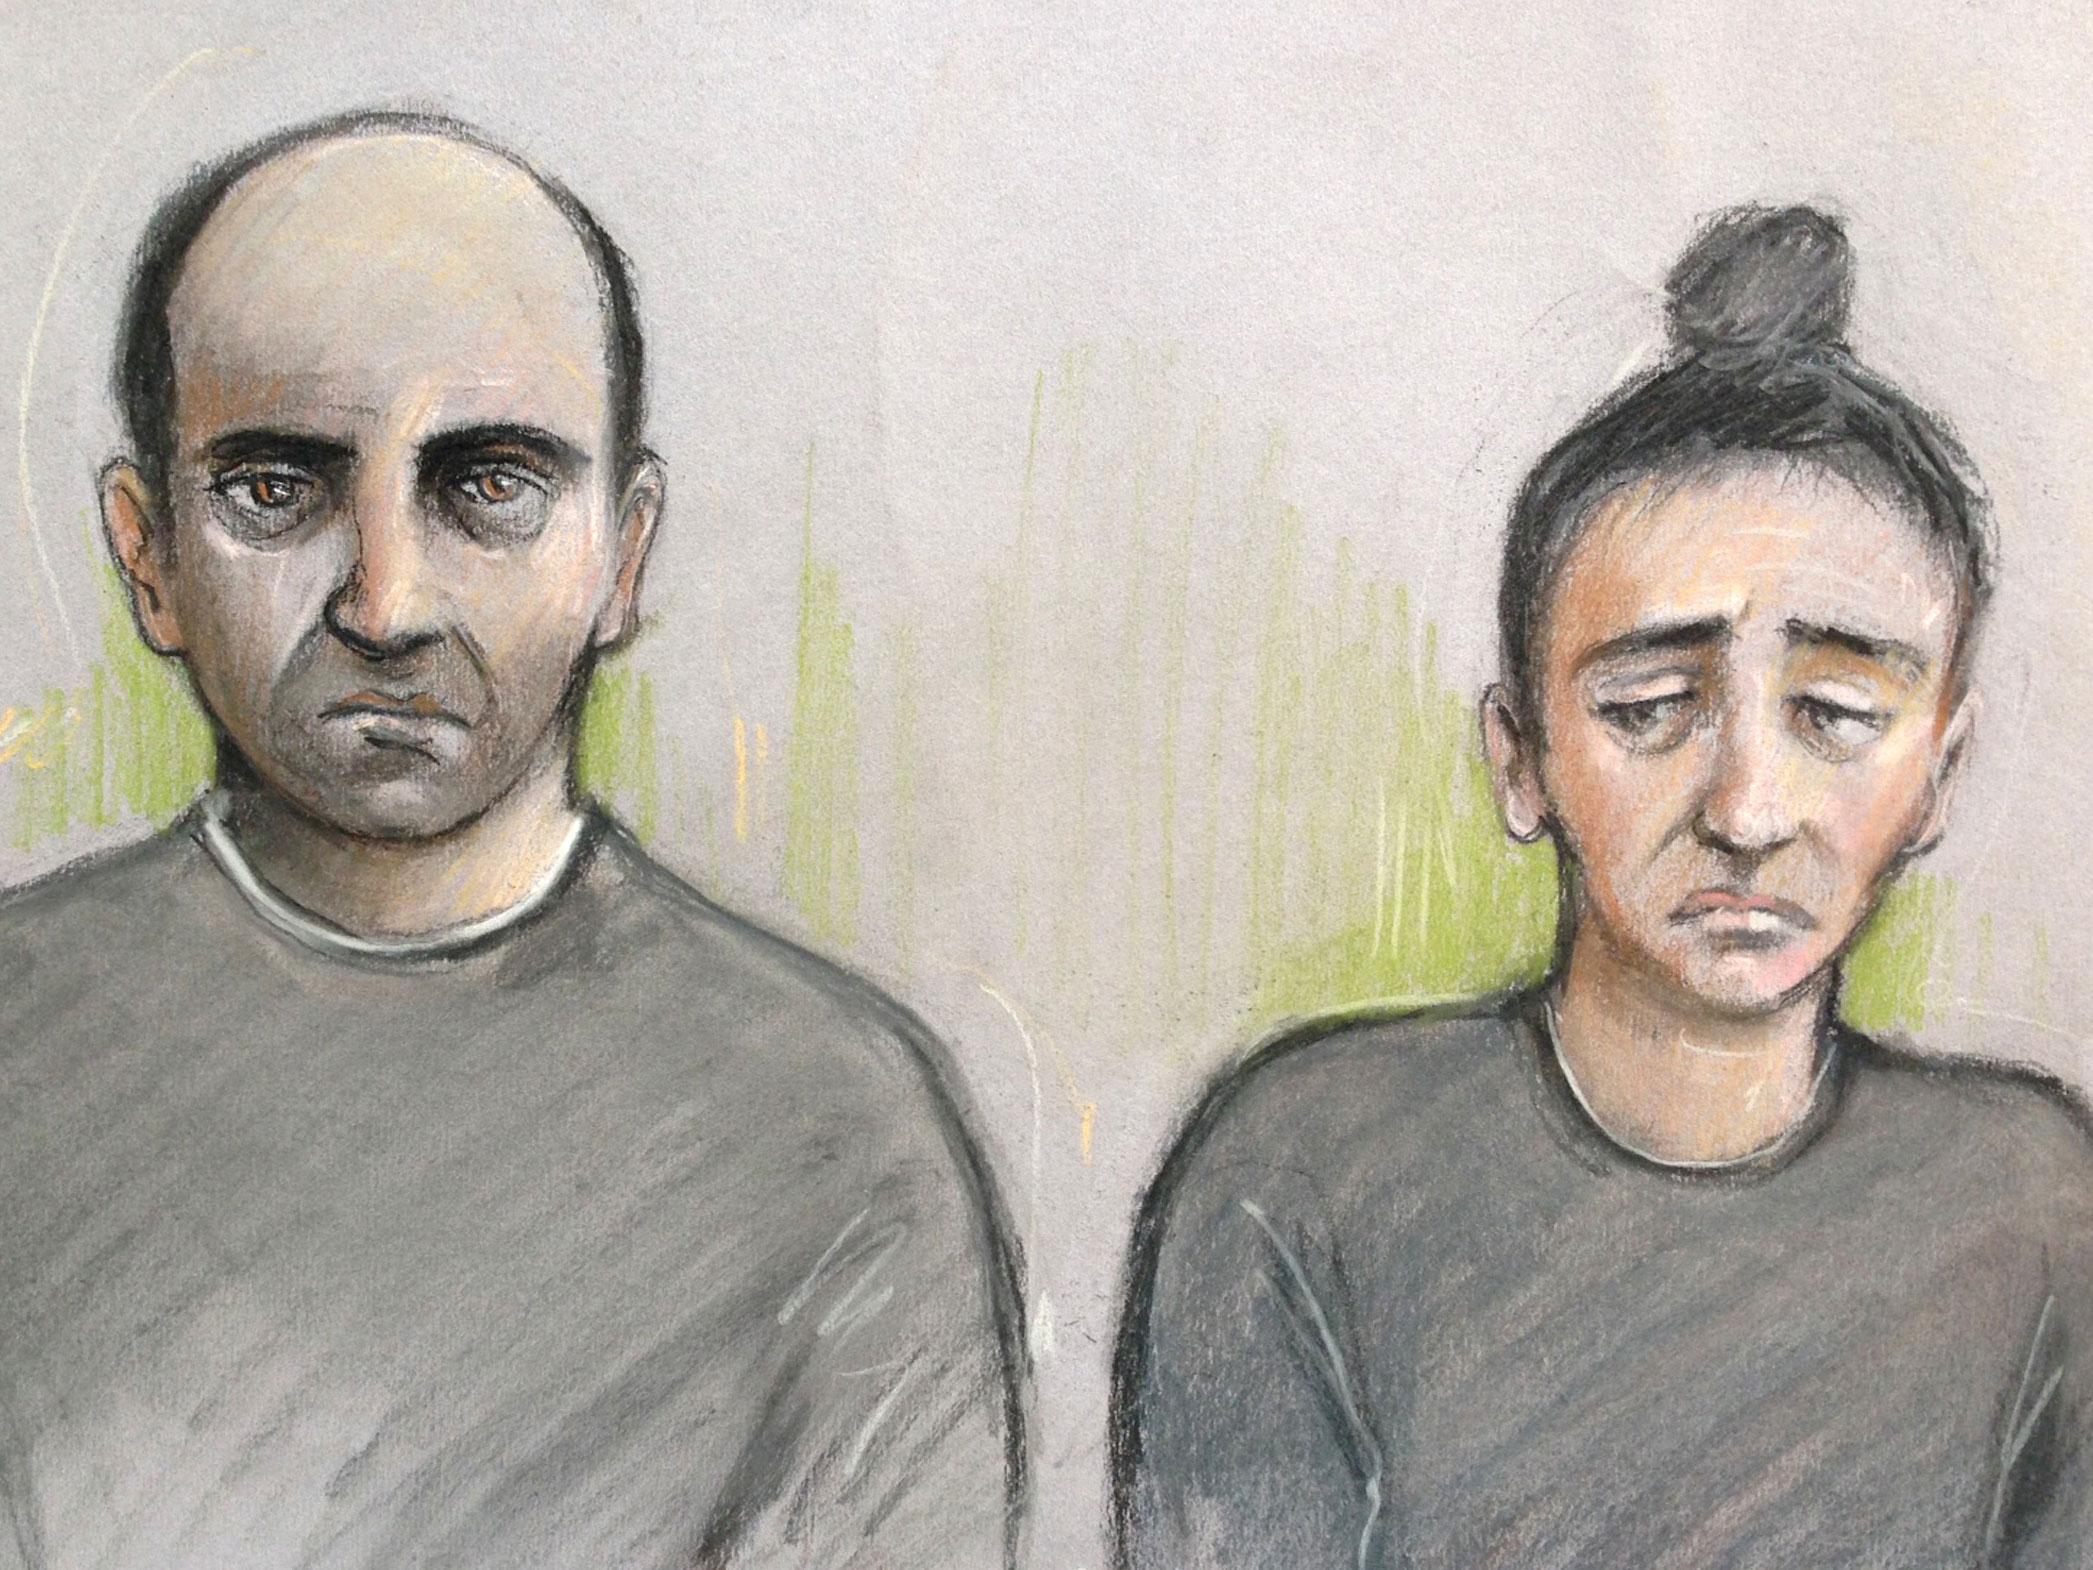 Court artist sketch of Ouissem Medouni 40, and his partner Sabrina Kouider, 34, appearing at the Old Bailey in London